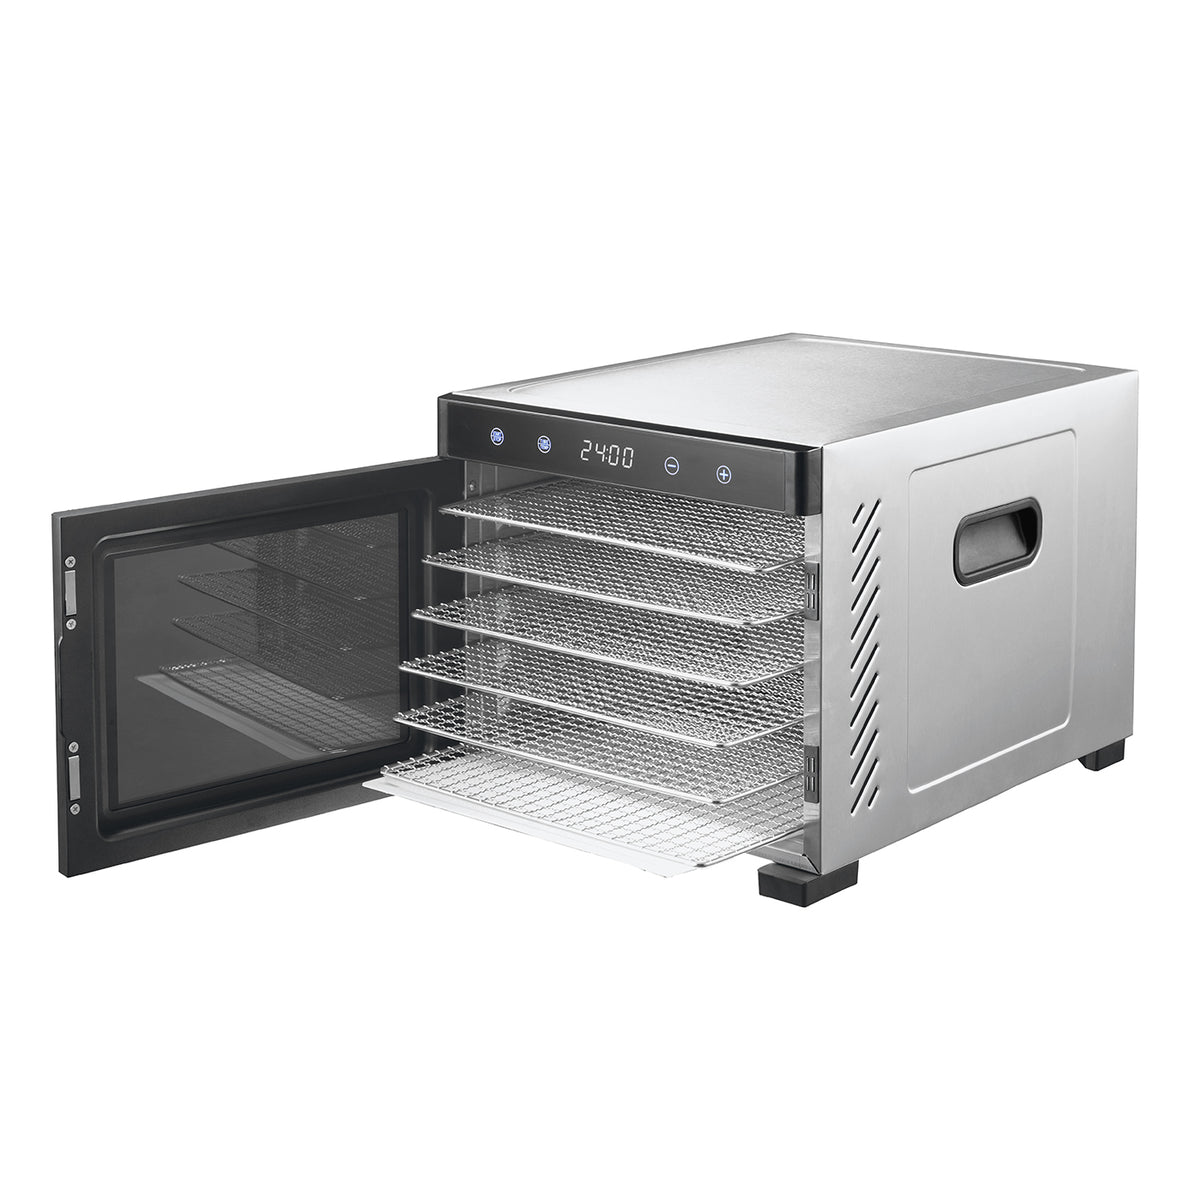 Stainless Steel Food Dehydrator with door open and 6 mesh trays sticking out of it.